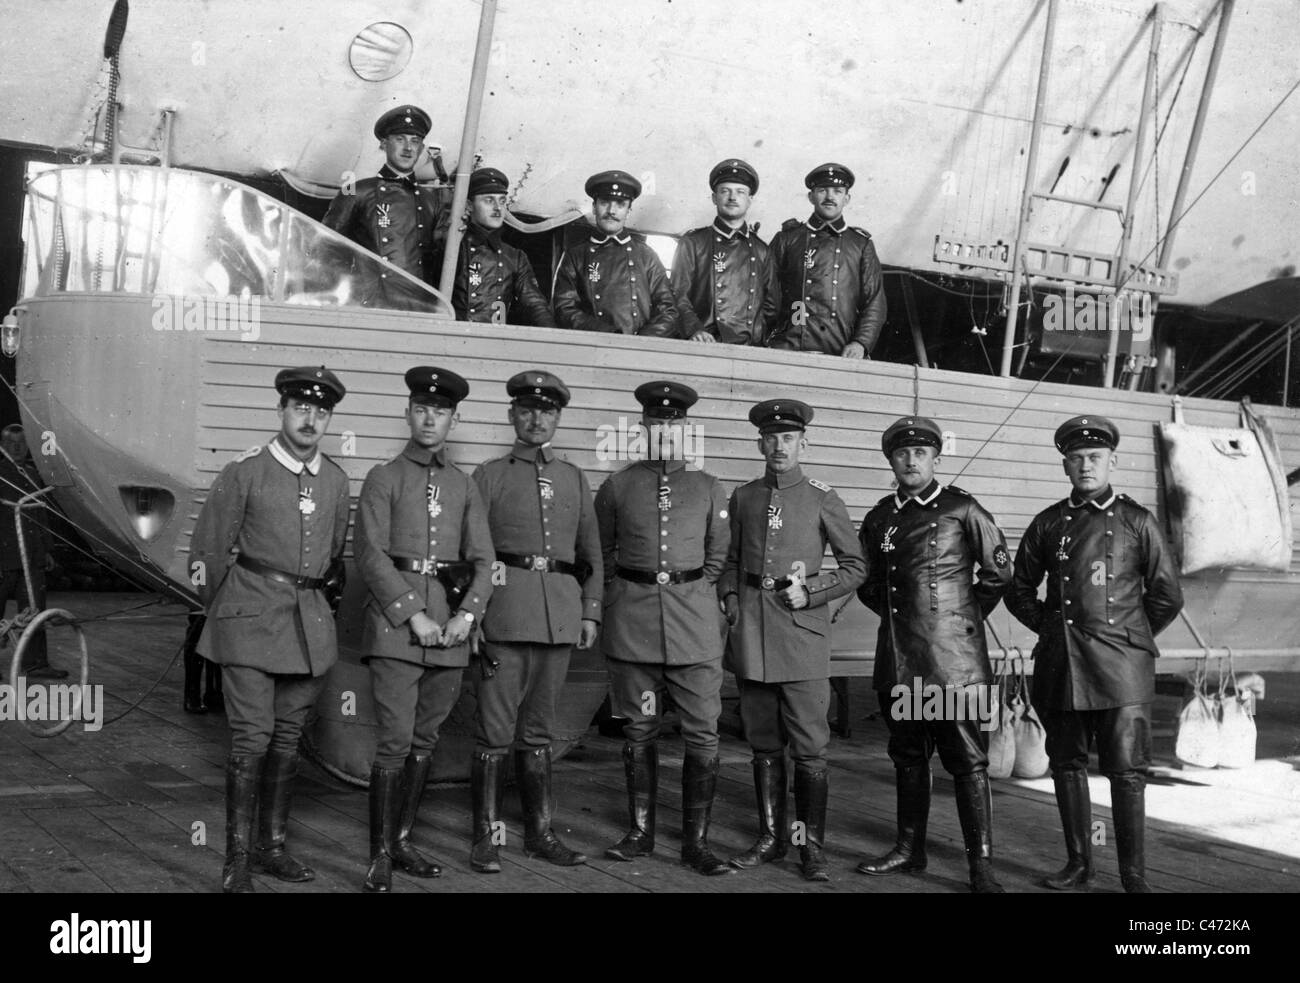 The crew of the military airship Z IX, 1914 Stock Photo